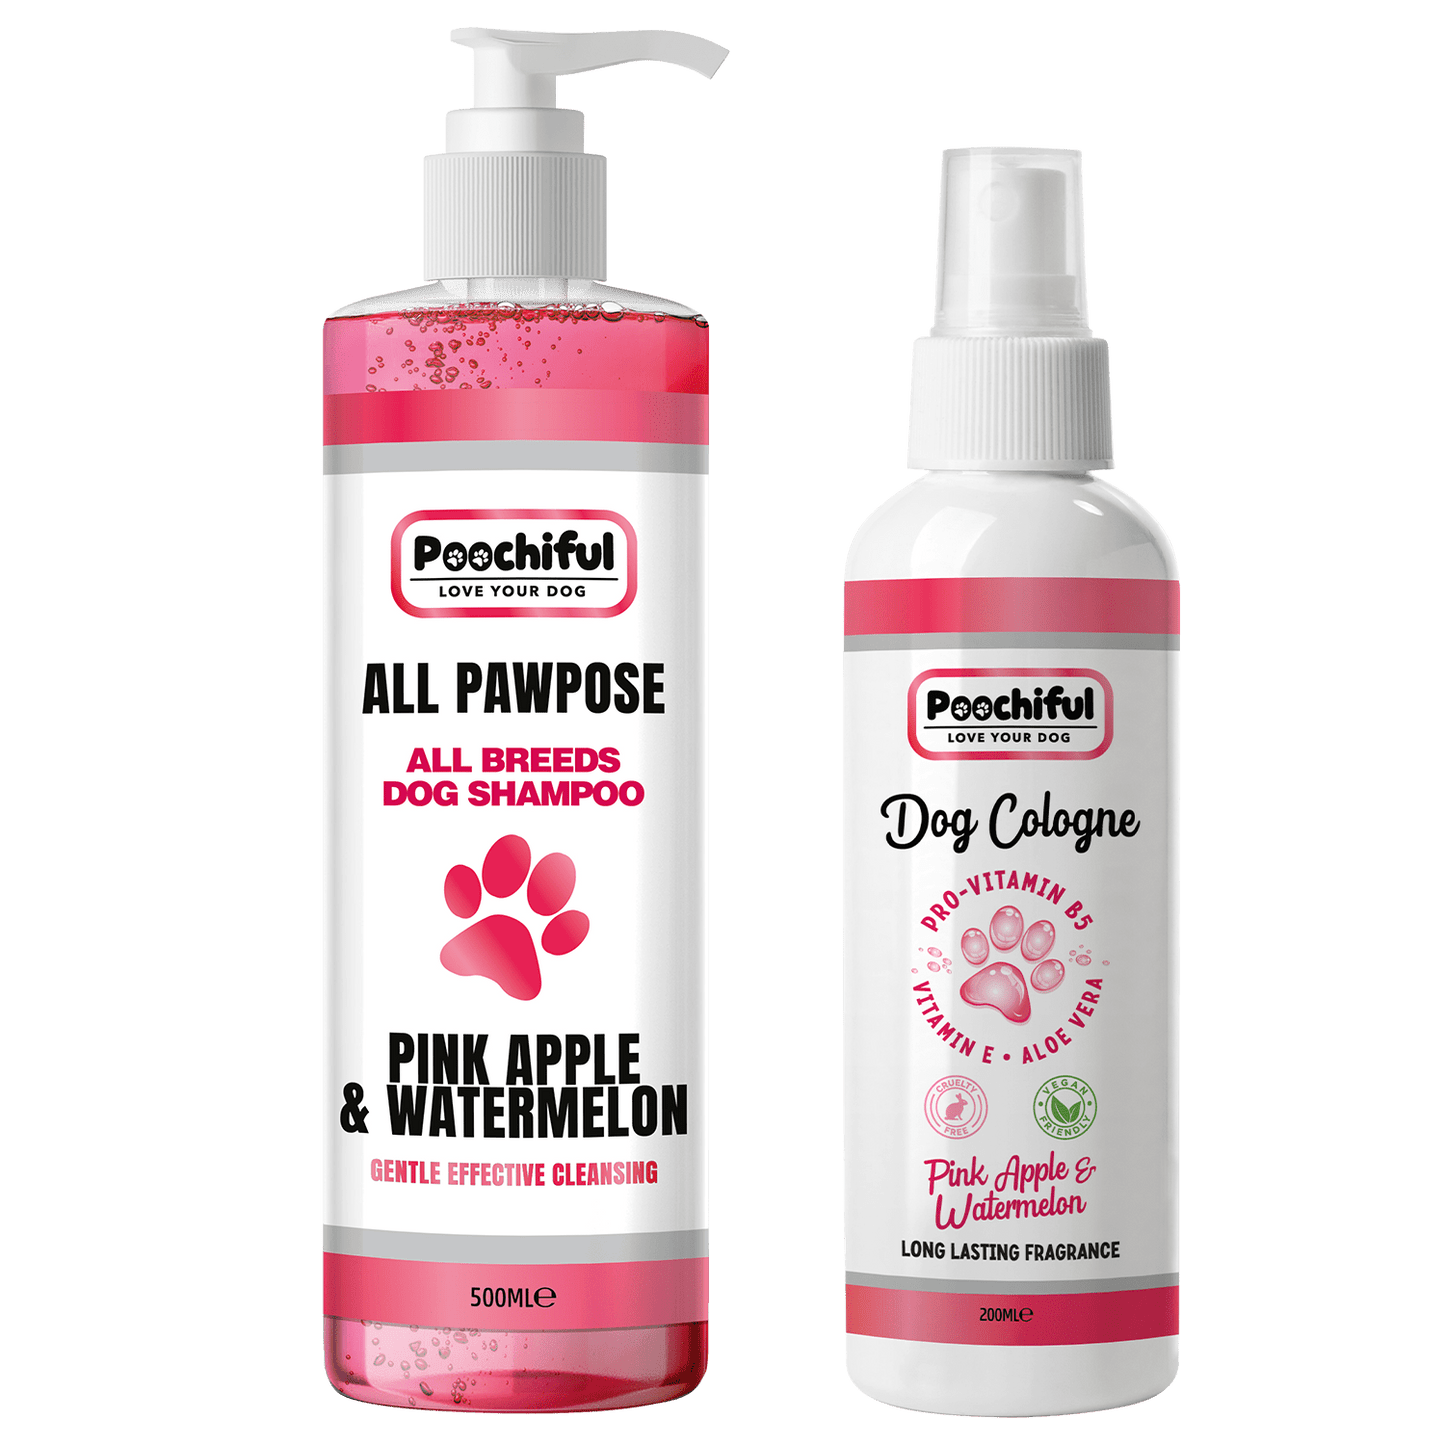 All Pawpose 500ml + Pink Apple and Watermelon 200ml Cologne Bundle